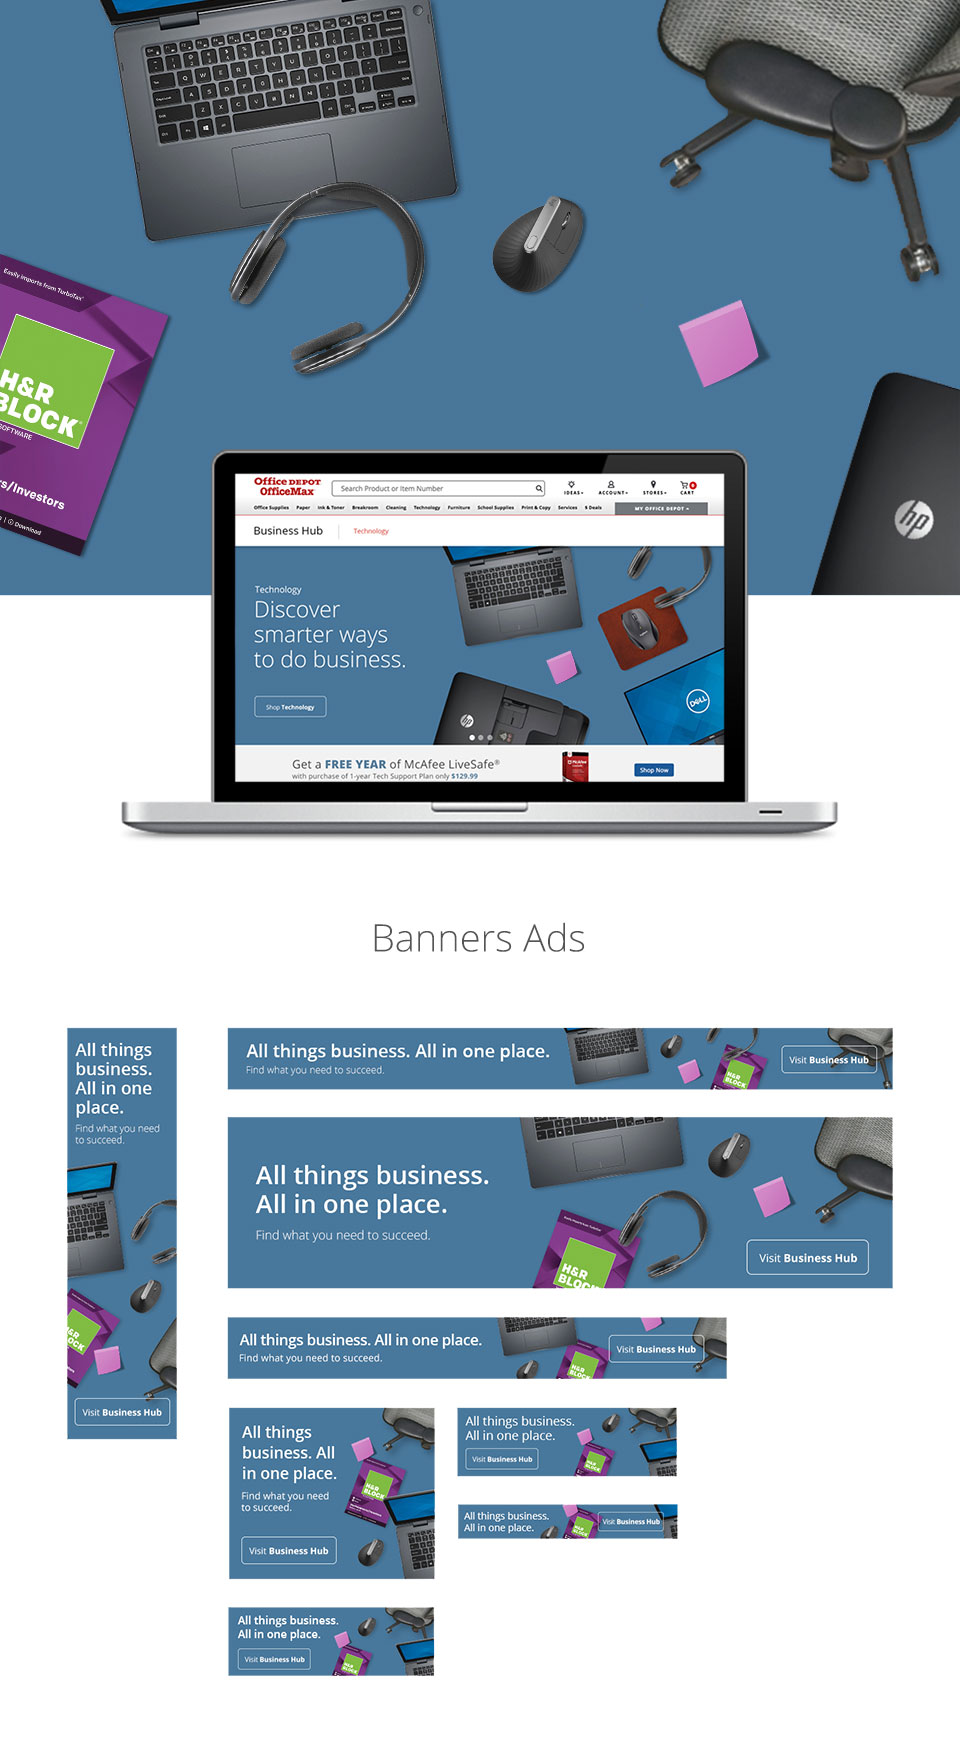 Office Depot Business Hub Banners and POV